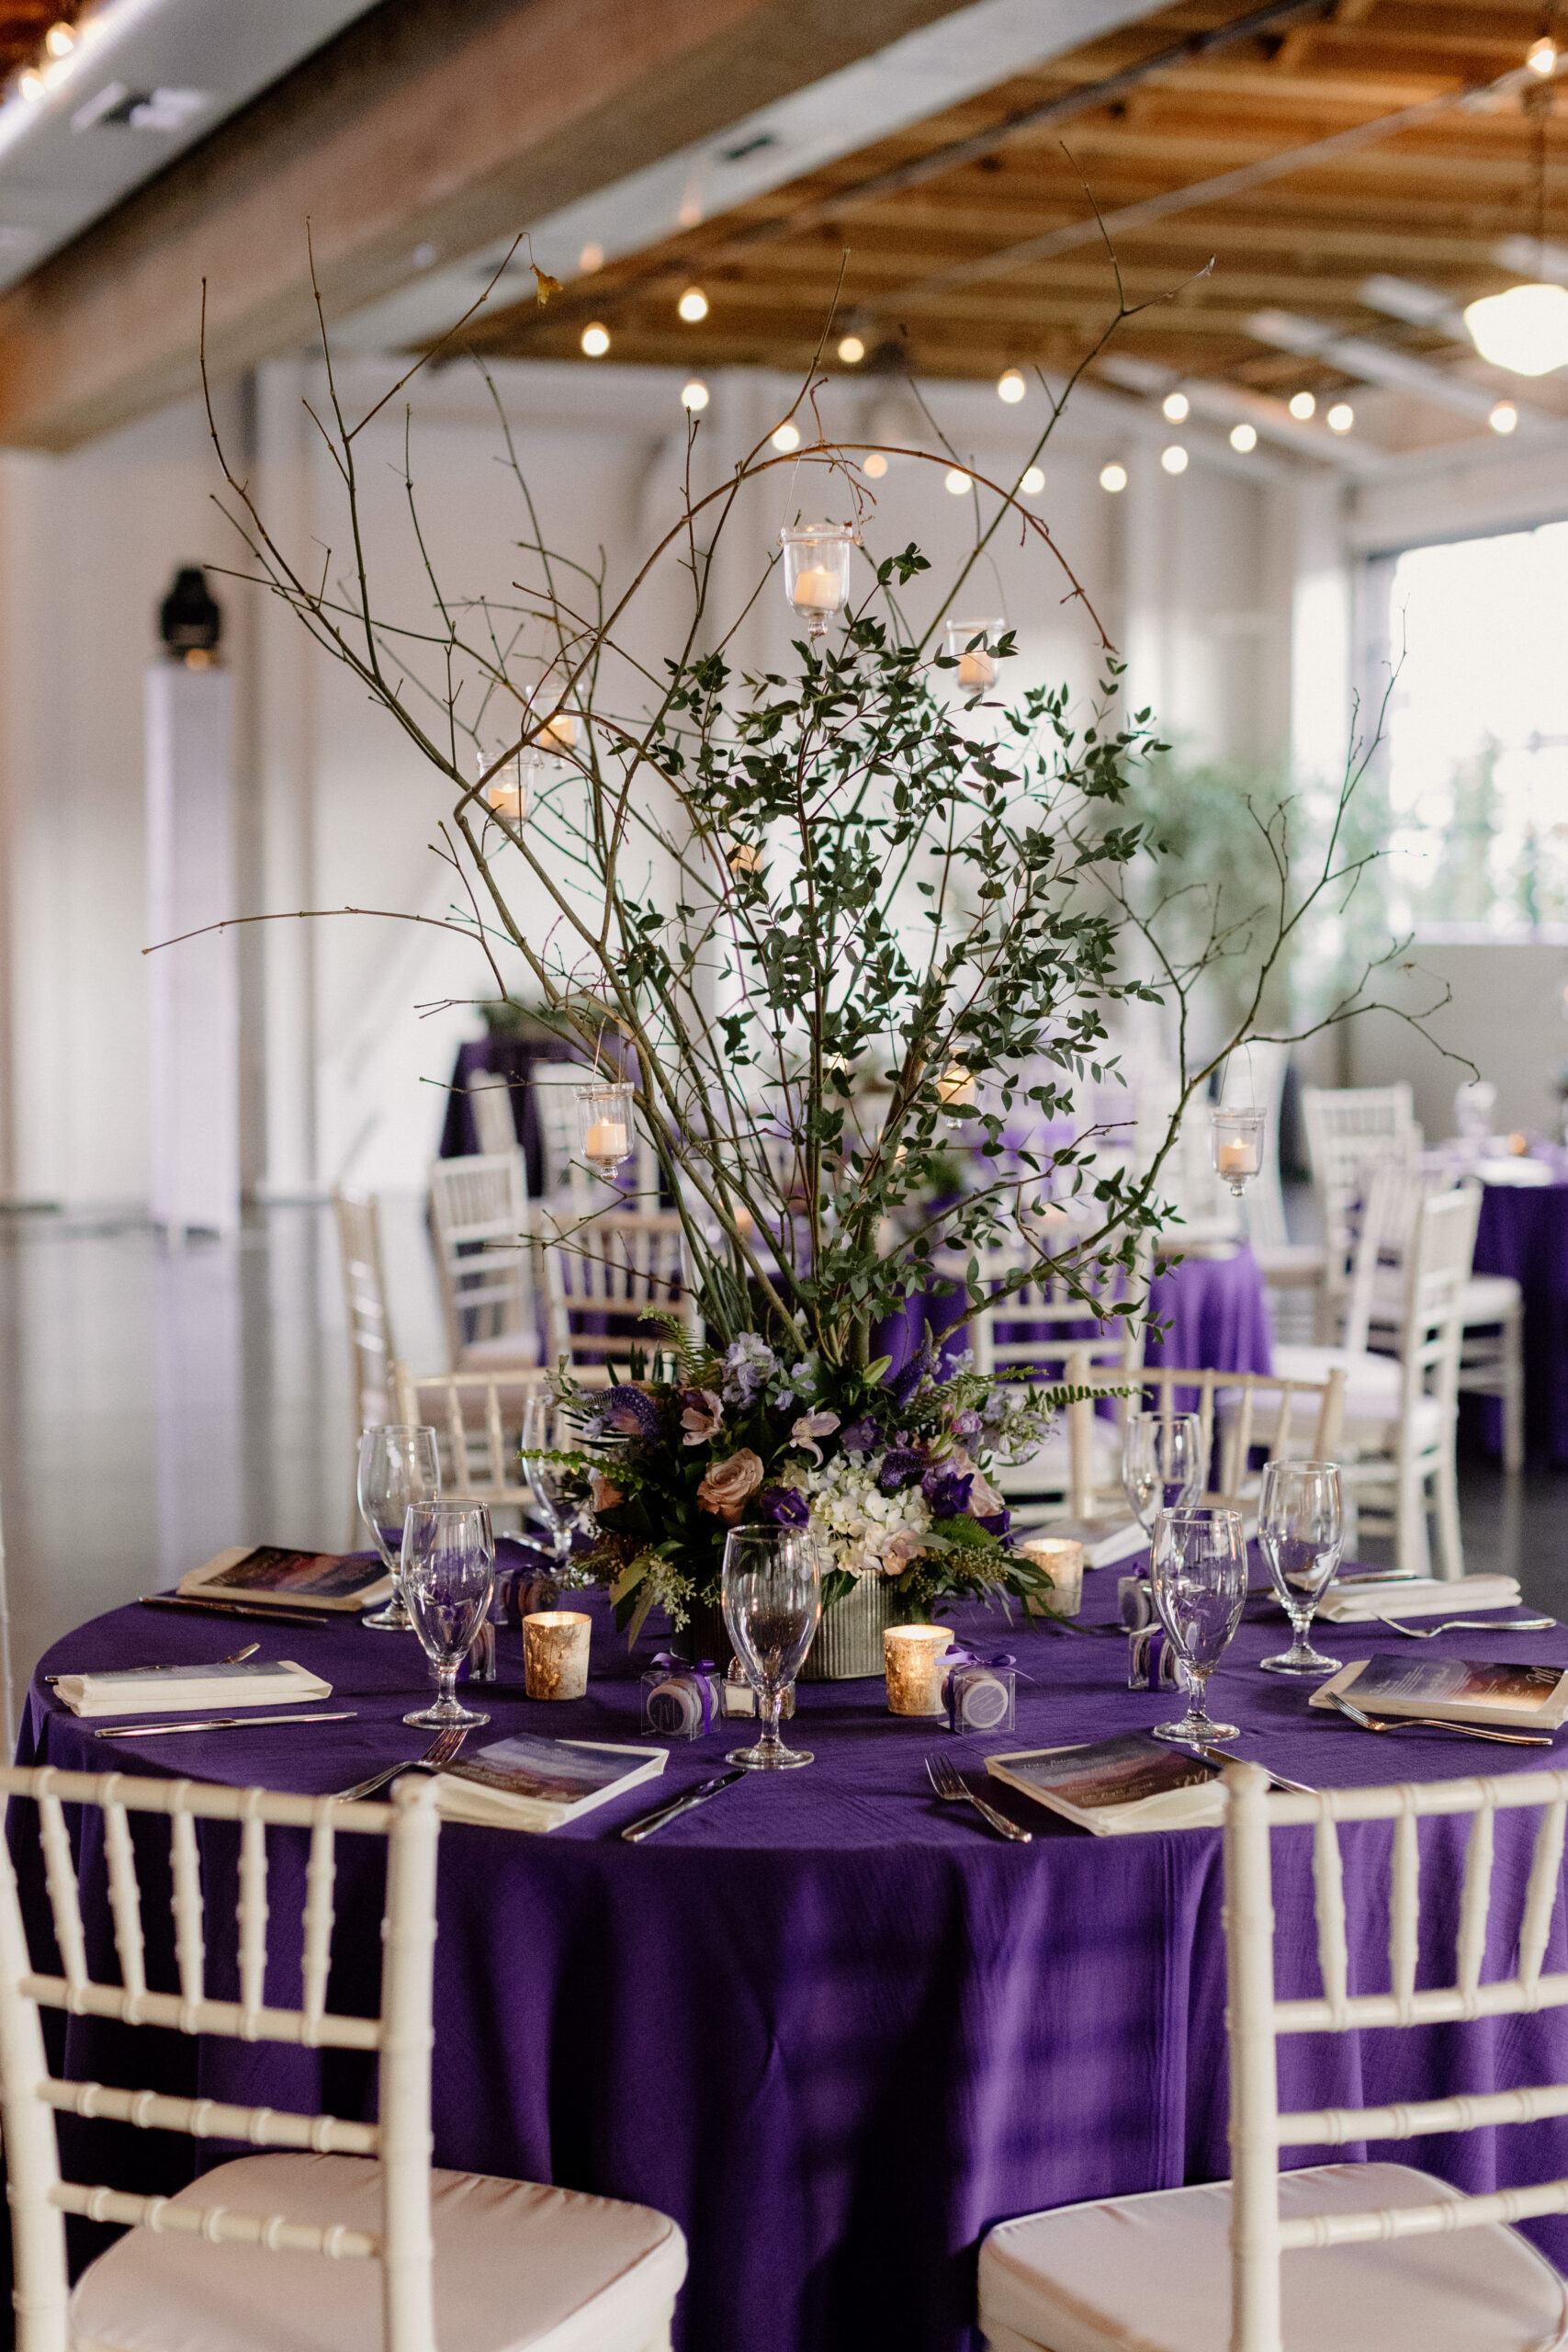 Gorgeous purple and white decor at a bat mitzvah party inside the Castaway venue in Portland.